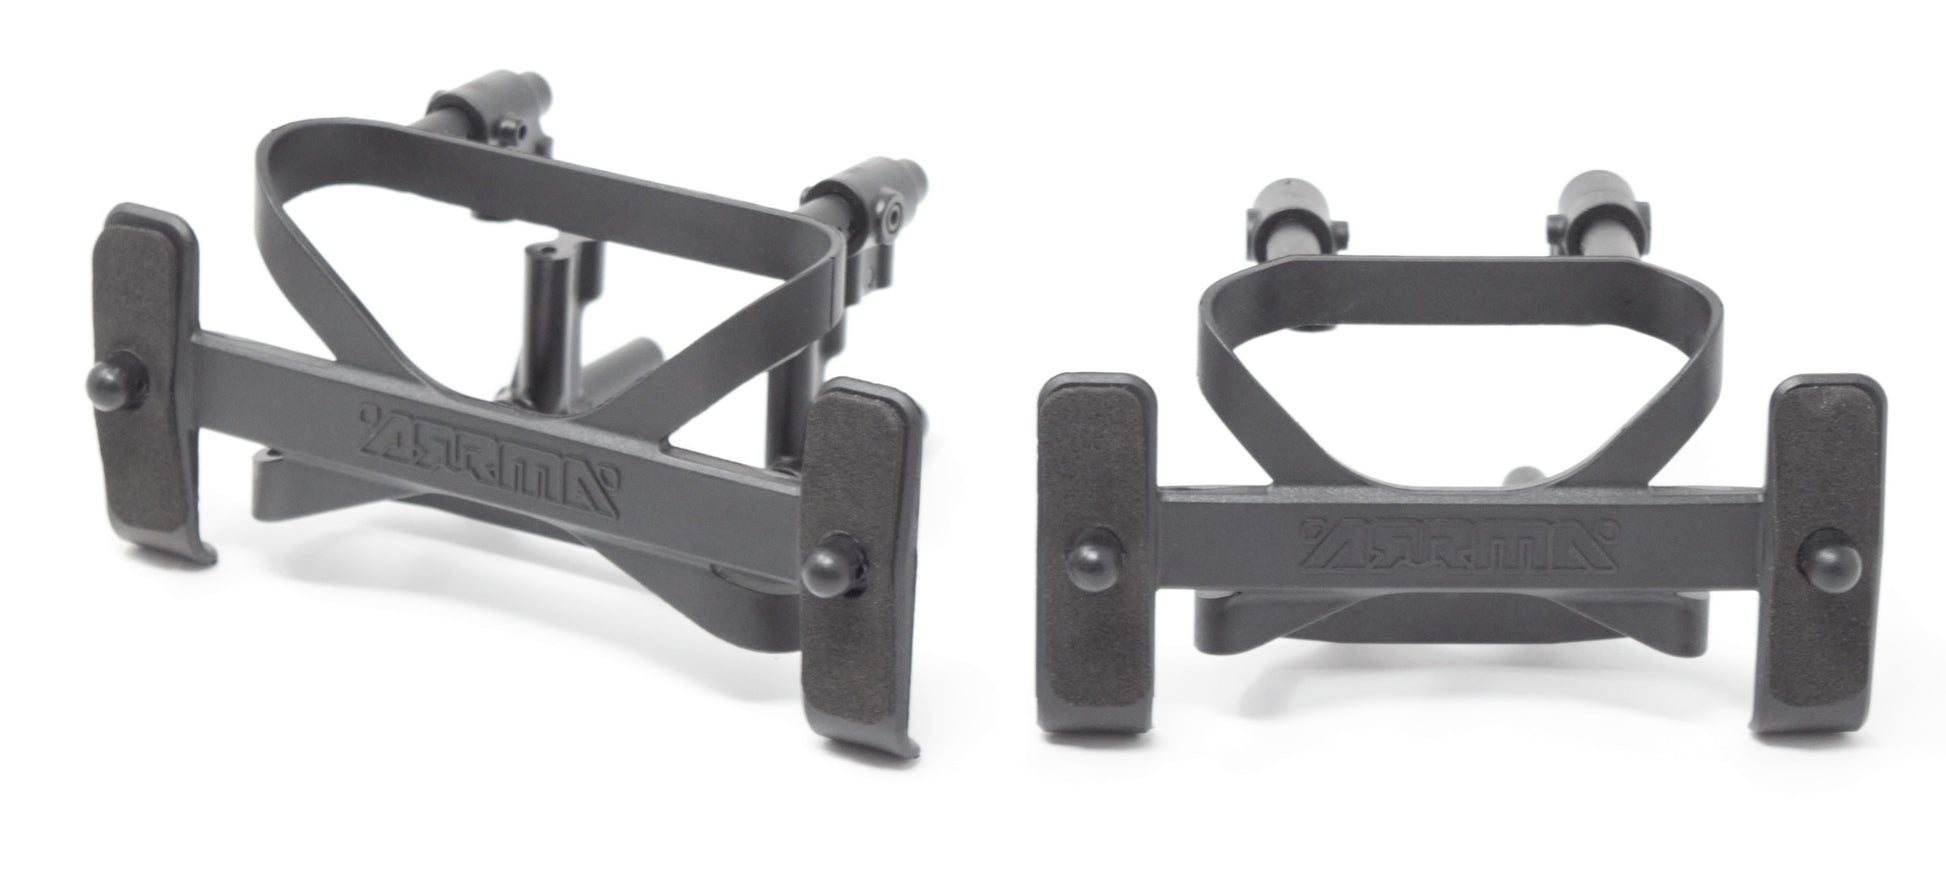 Arrma MOJAVE 6s EXB - Body Mount Set, posts front/rear composite ARA7204 - Dirt Cheap RC SAVING YOU MONEY, ONE PART AT A TIME